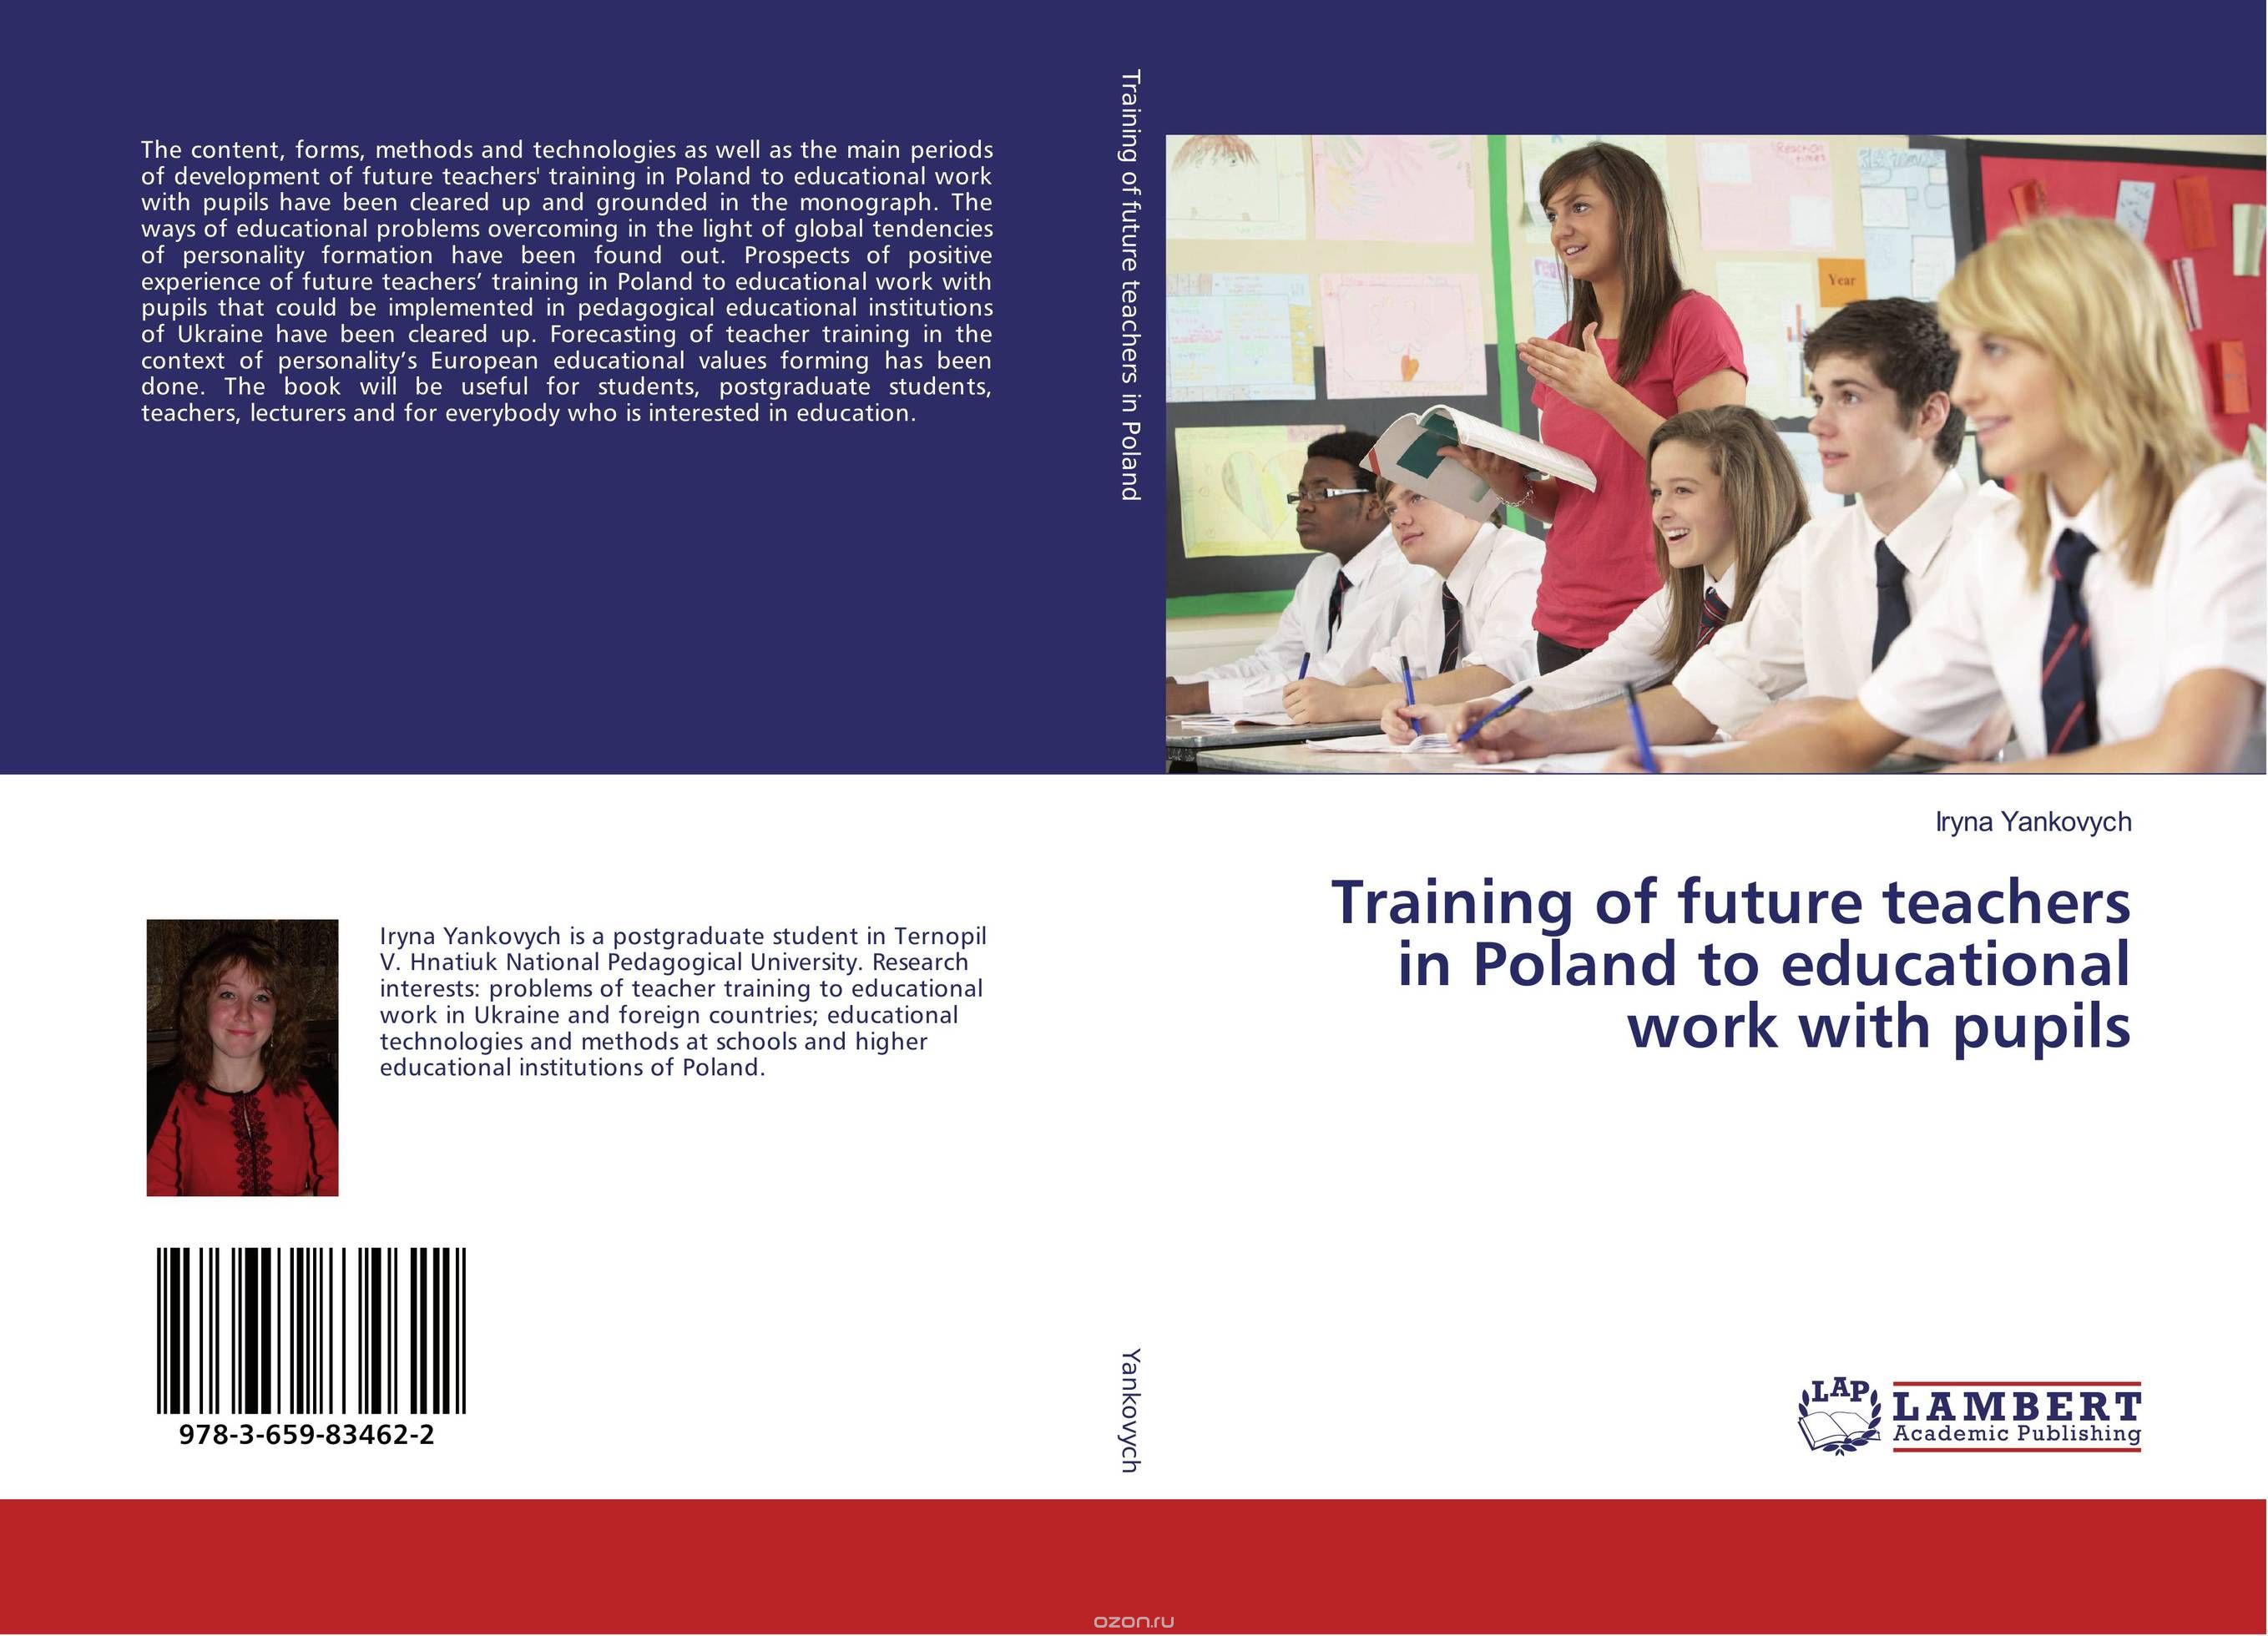 Training of future teachers in Poland to educational work with pupils